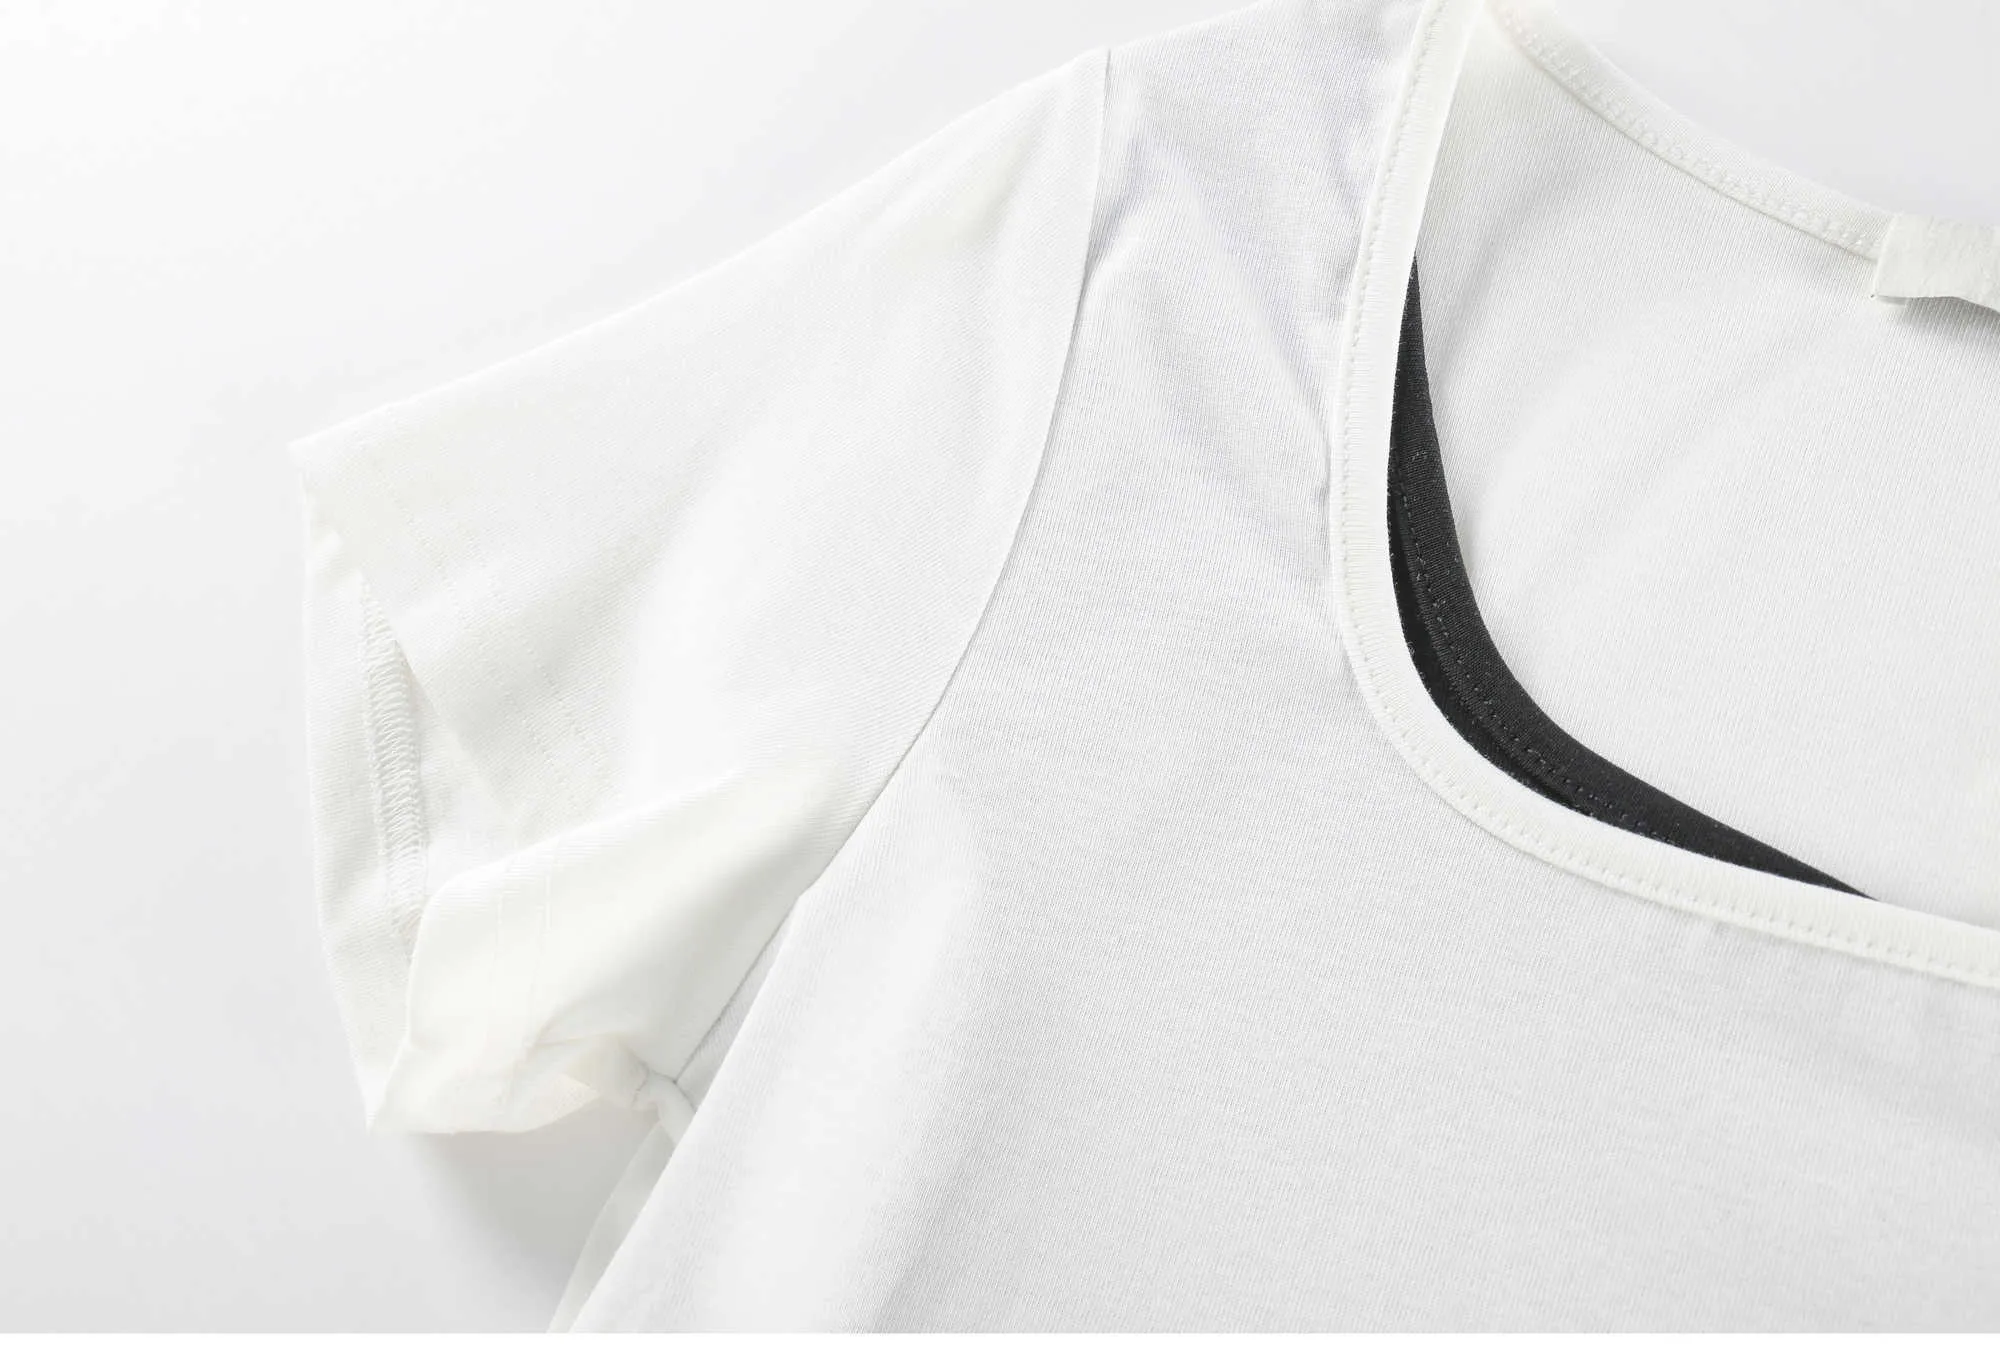 Casual Square Collar Short Sleeve T-shirt Women's Summer Design Slim Fake Two White Top 210615